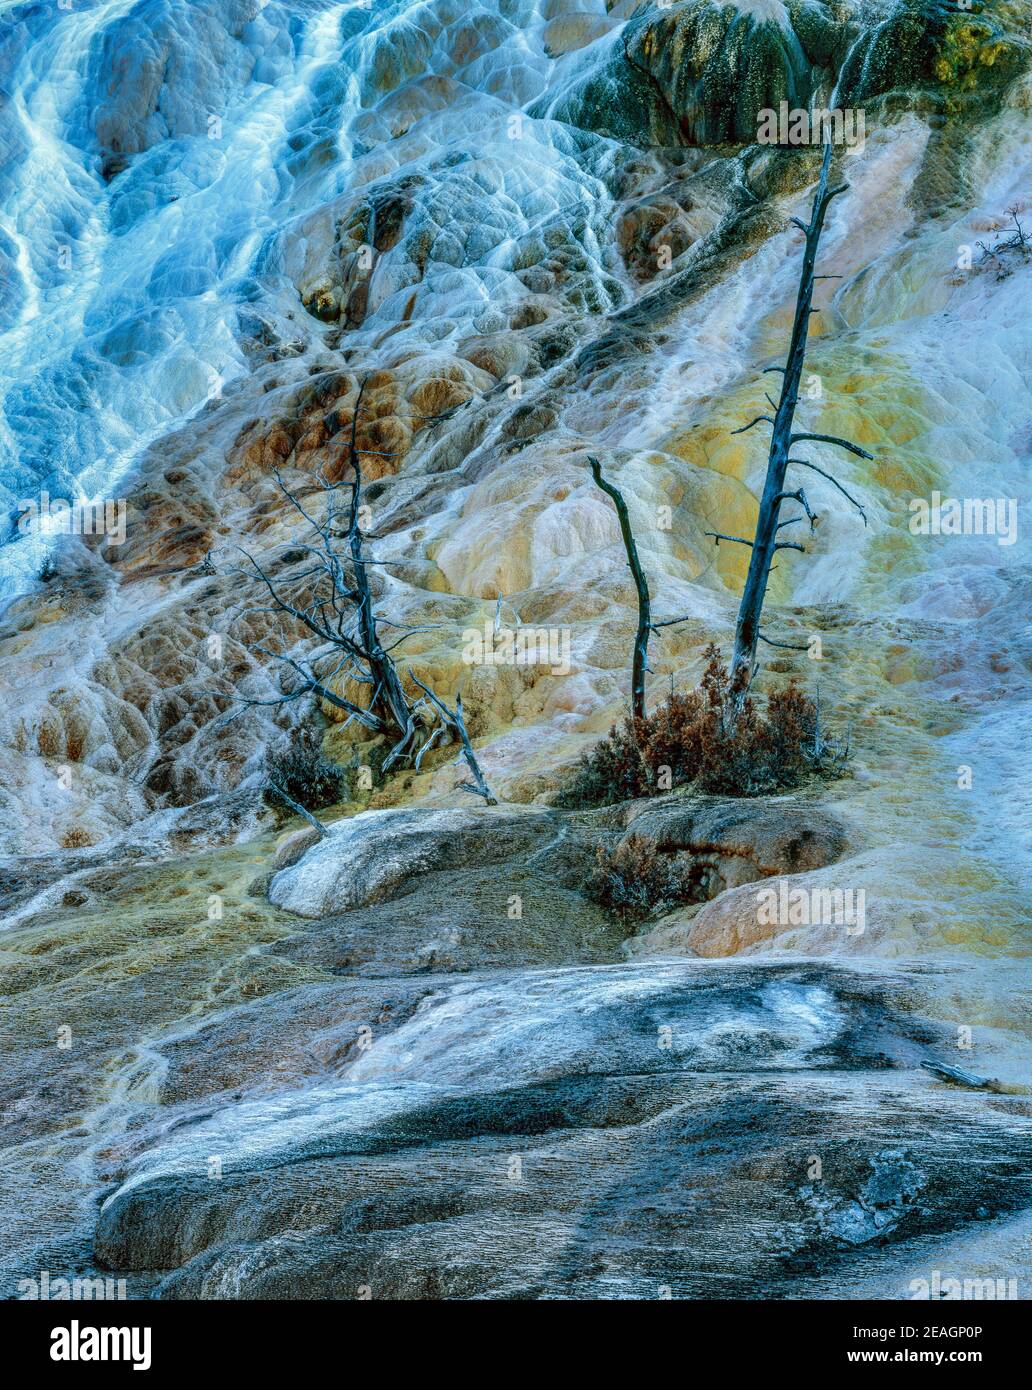 Palette Spring, Mammoth Hot Springs, Yellowstone National Park, Wyoming Stock Photo